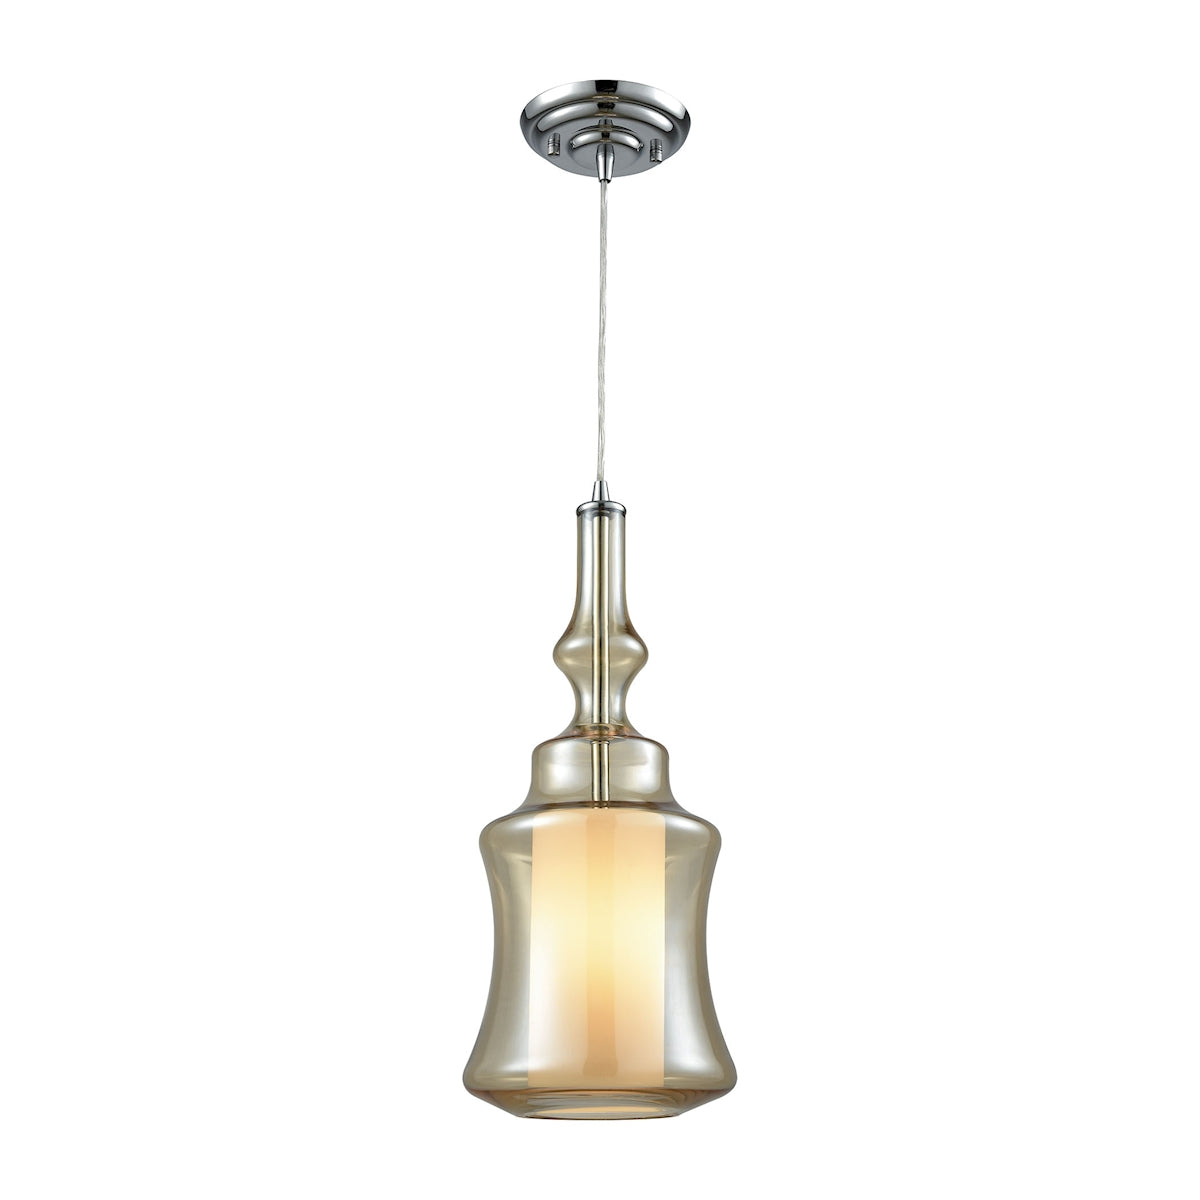 ELK Lighting 56502/1 Alora 1-Light Mini Pendant in Chrome with Champagne-plated and Opal Glass